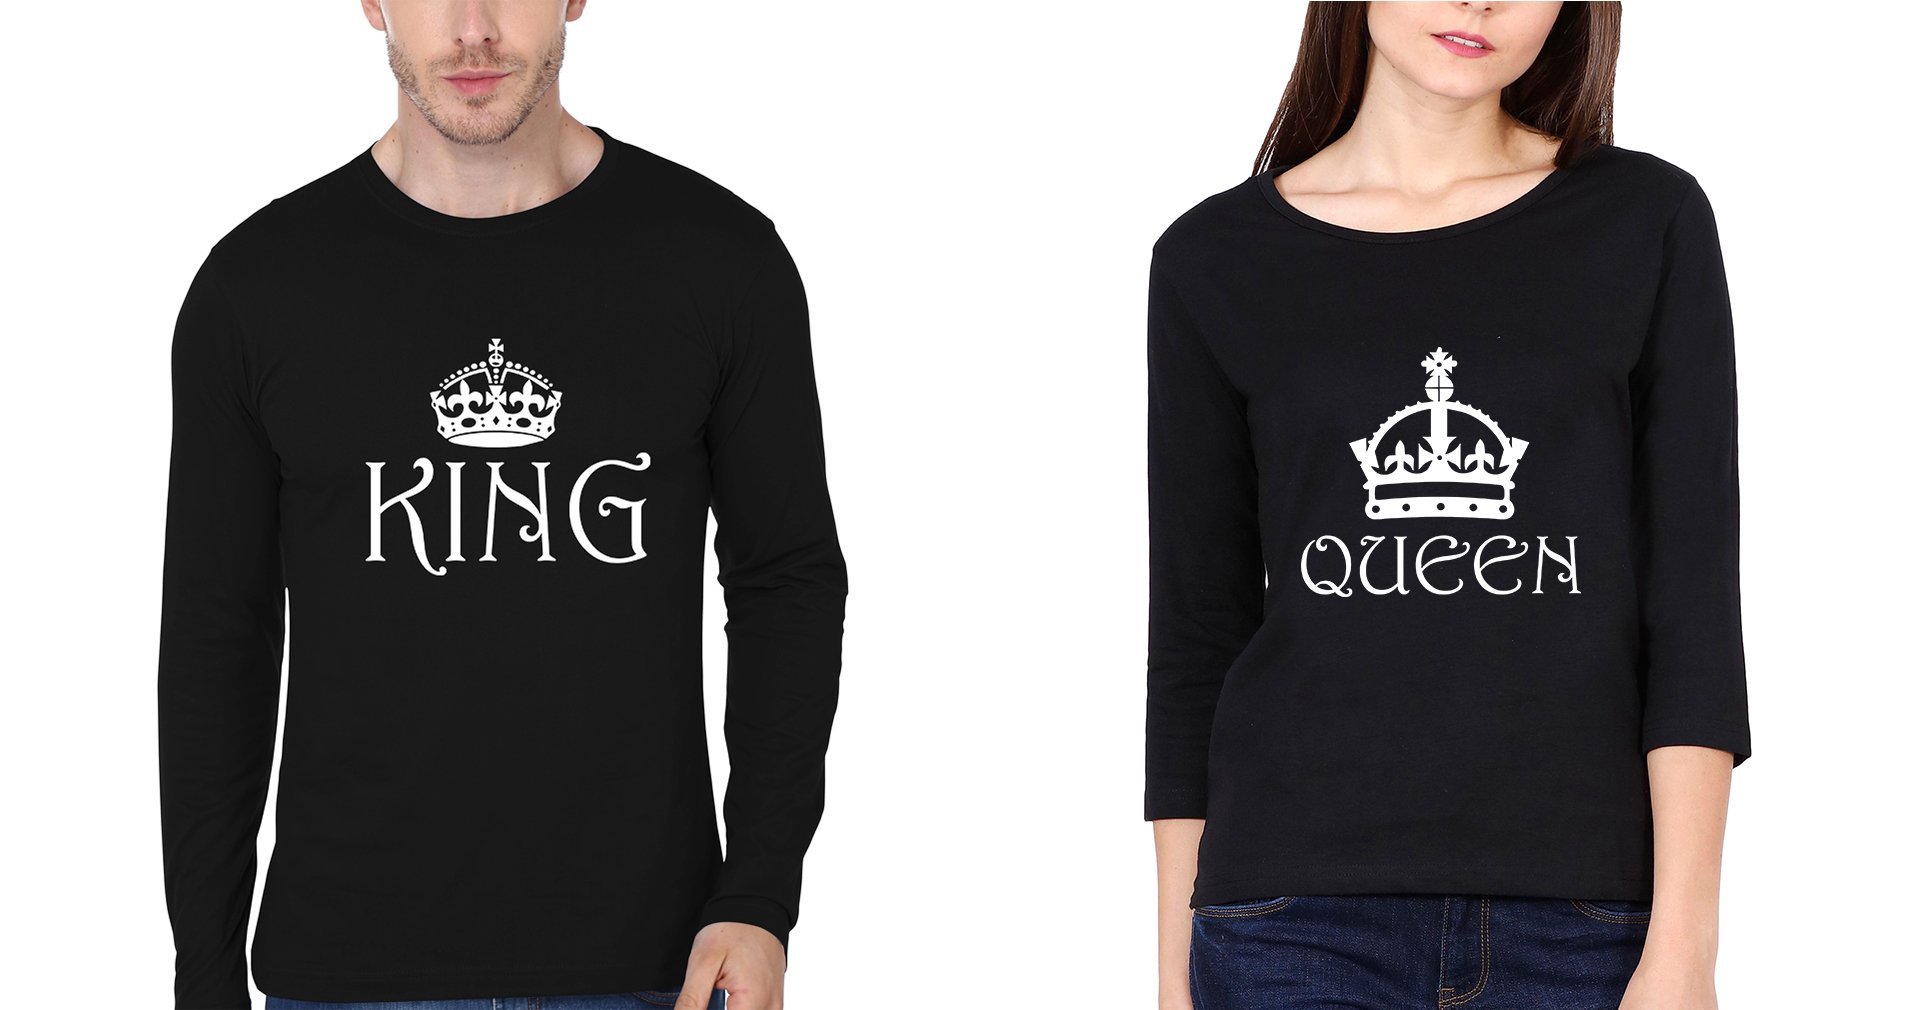 Buy Touch Me Fashions, Lovers Pack, Cotton, King Queen Love Couples D7, Printed, Fullsleeve V-Neck, Black T Shirts for Couples